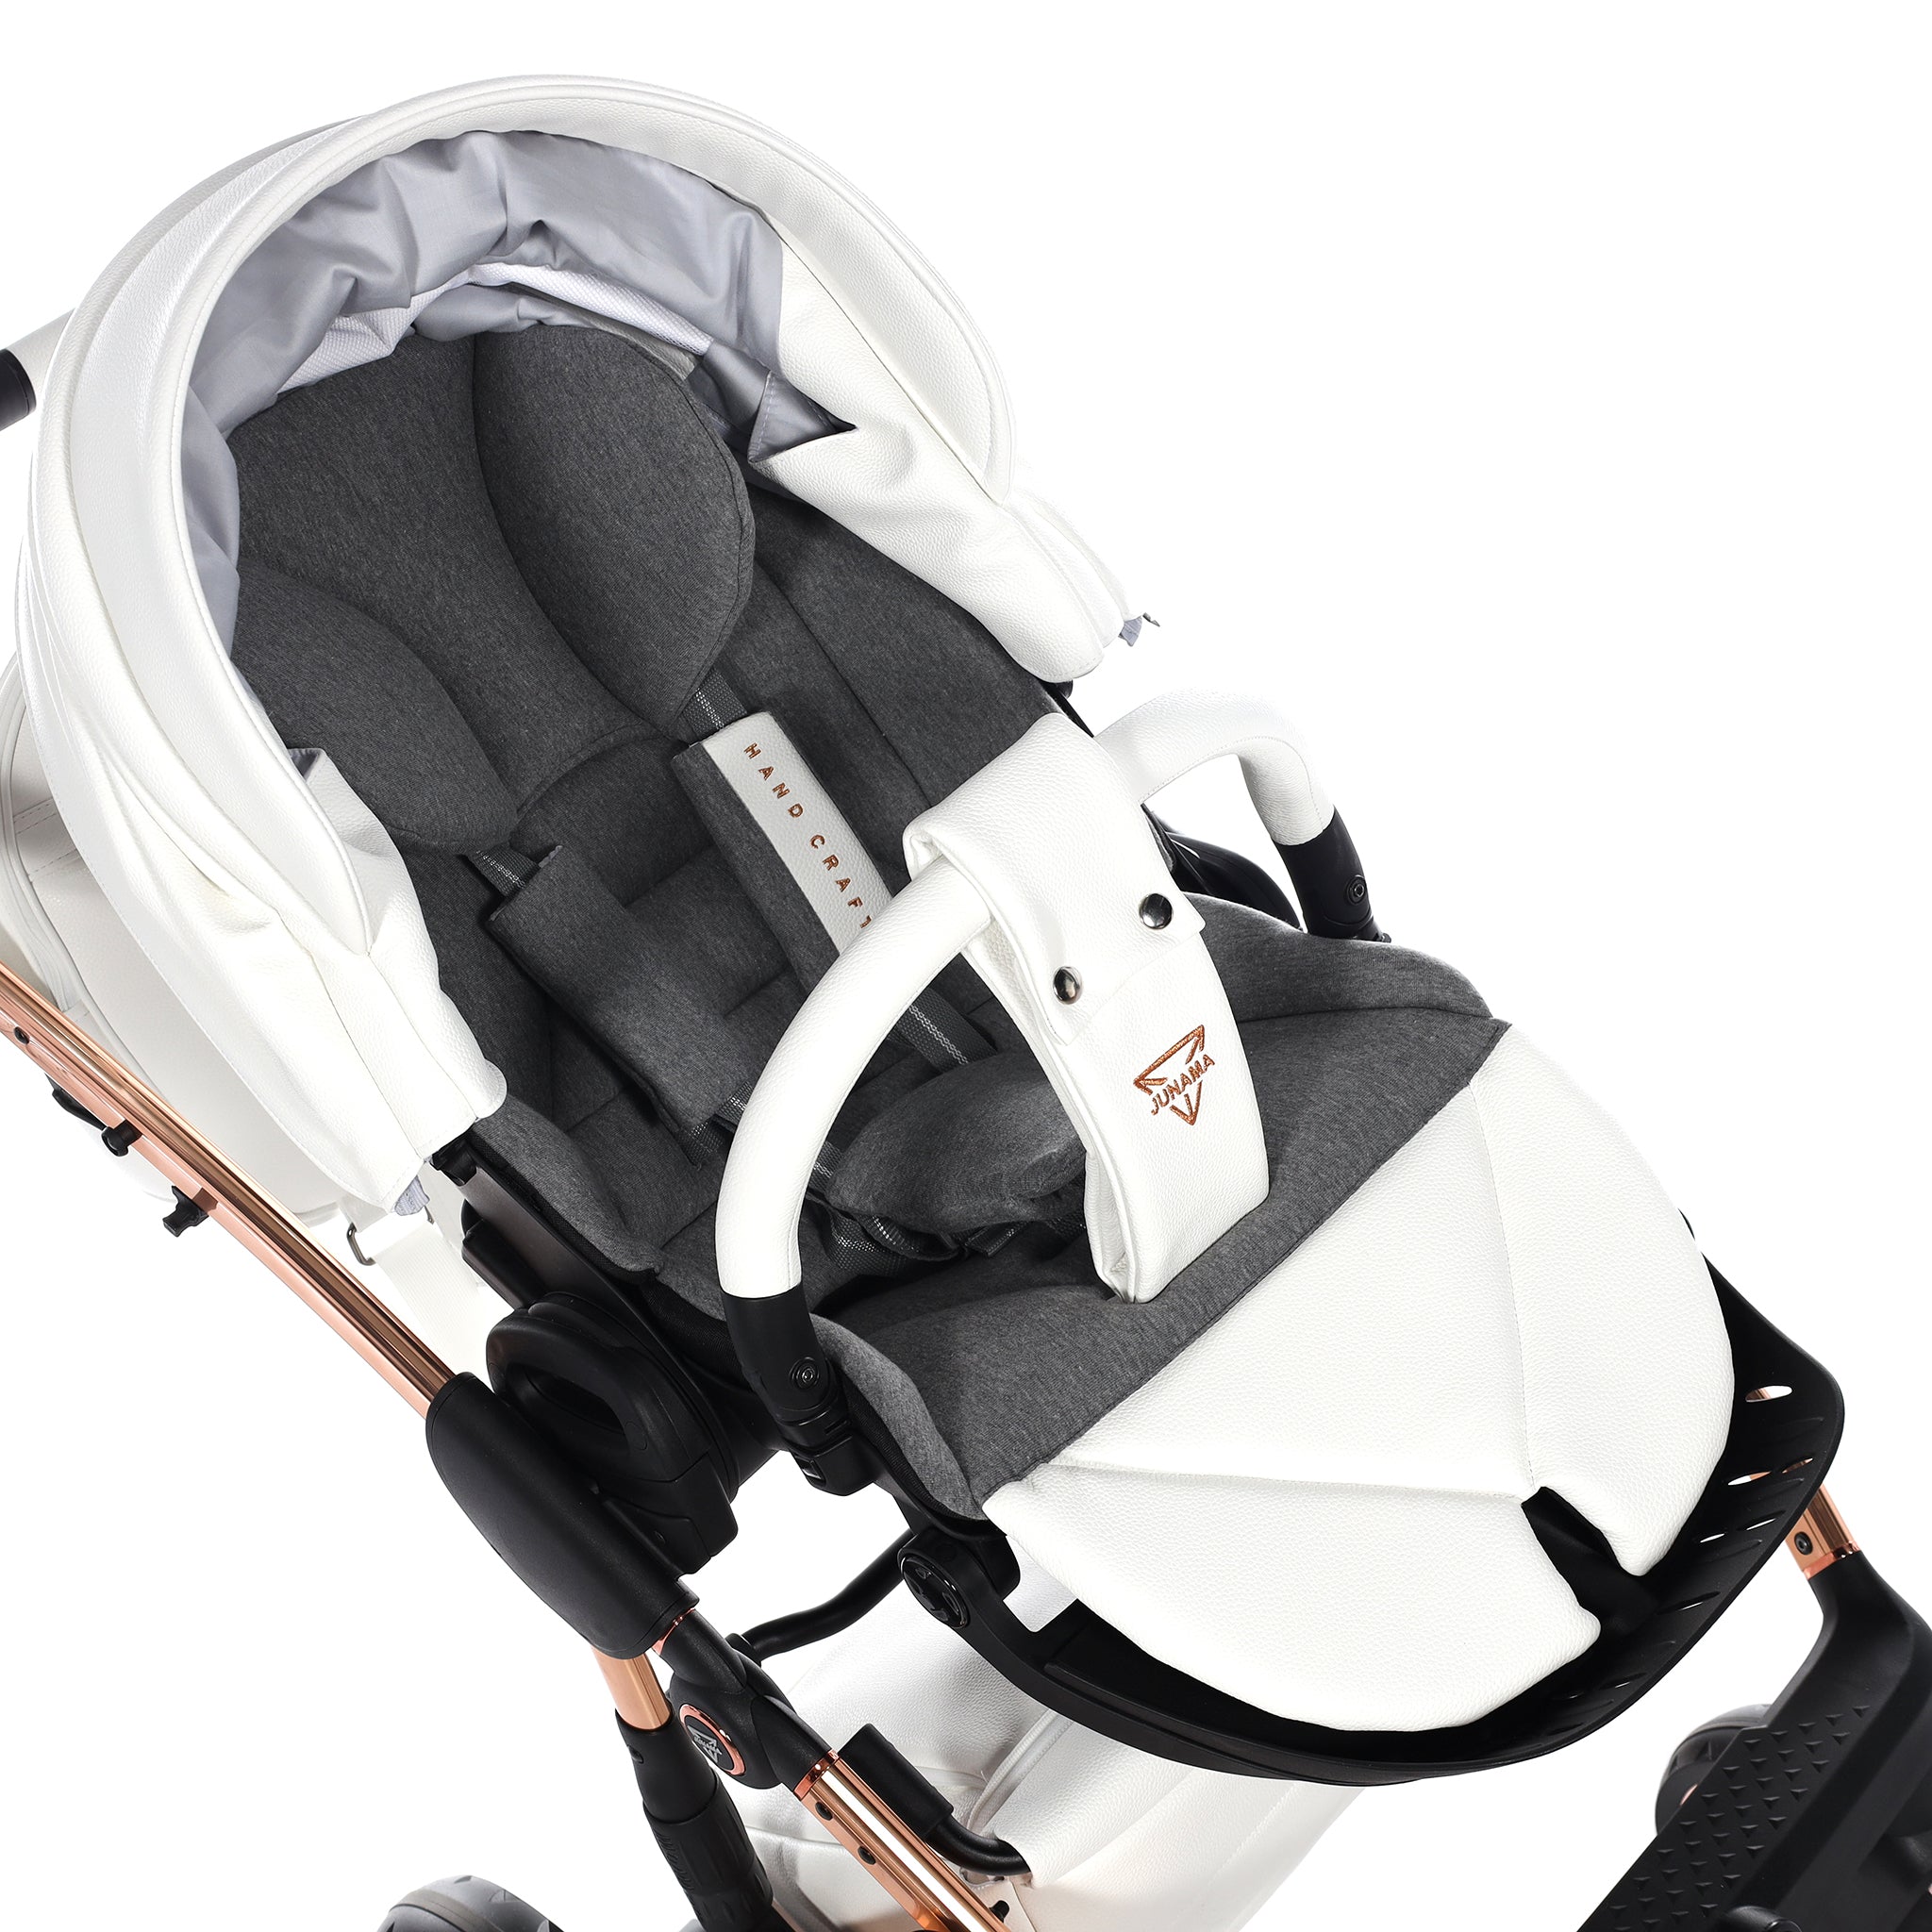 Junama Handcraft, baby prams or stroller 2 in 1 - White and Copper, number: JUNHC09